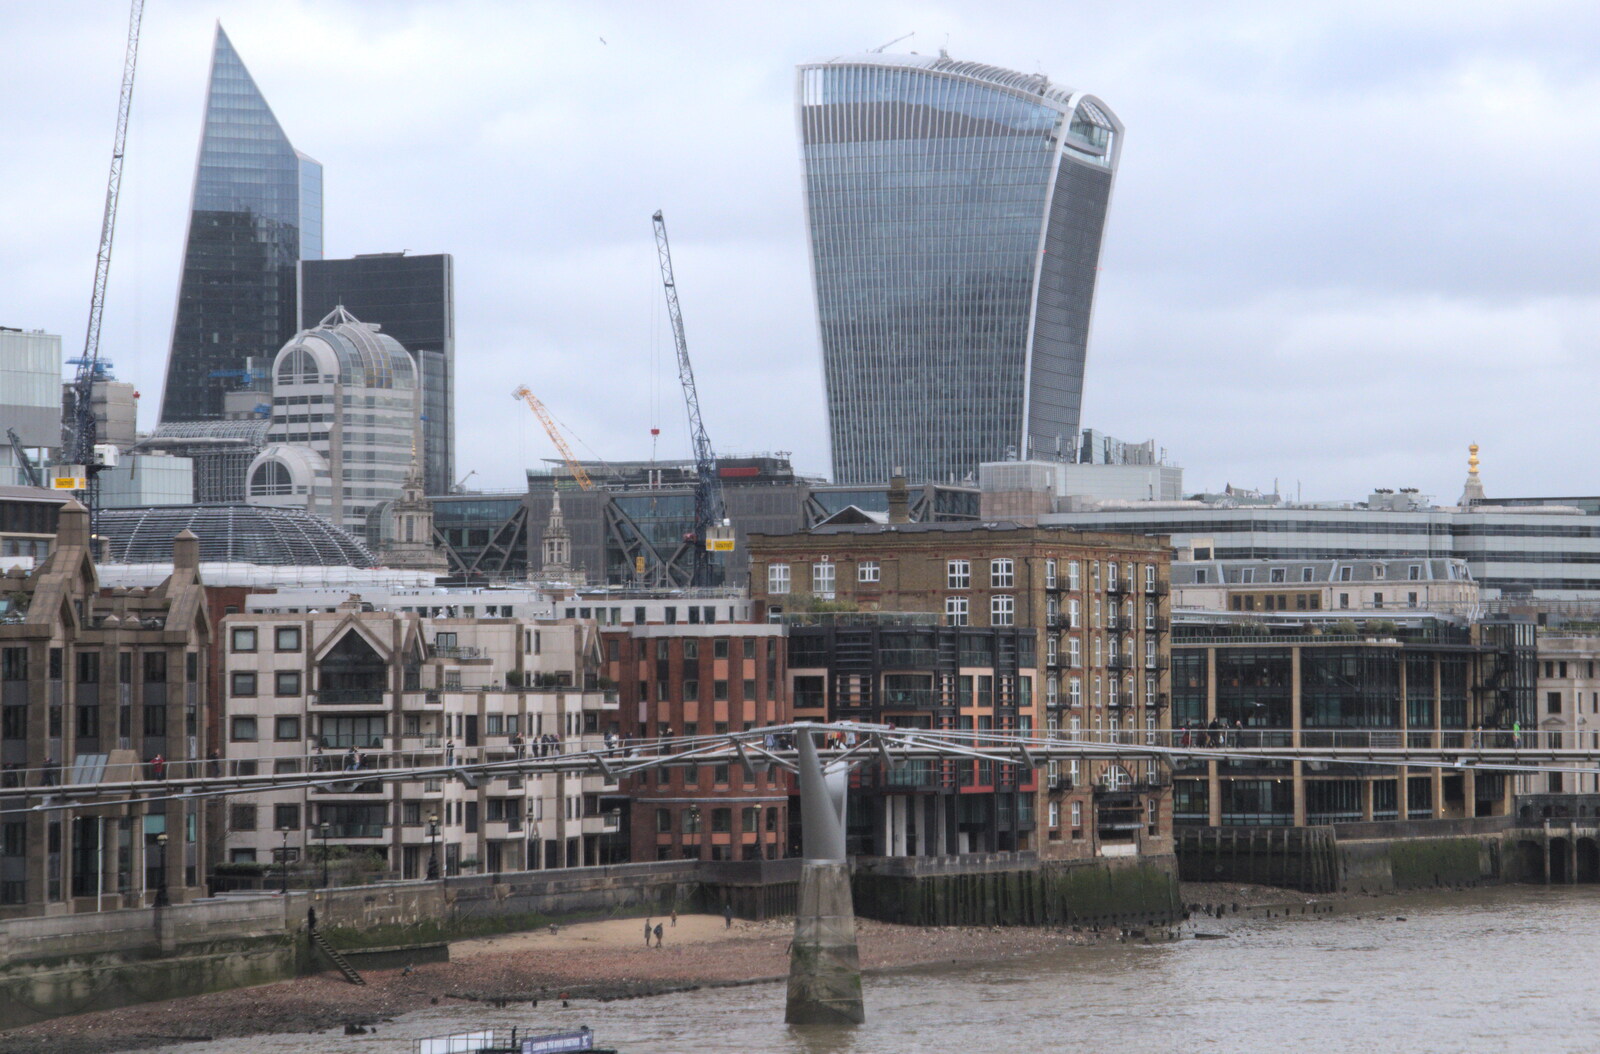 The Wobbly Bridge, and the Walkie Talkie from HMS Belfast and the South Bank, Southwark, London - 17th February 2020